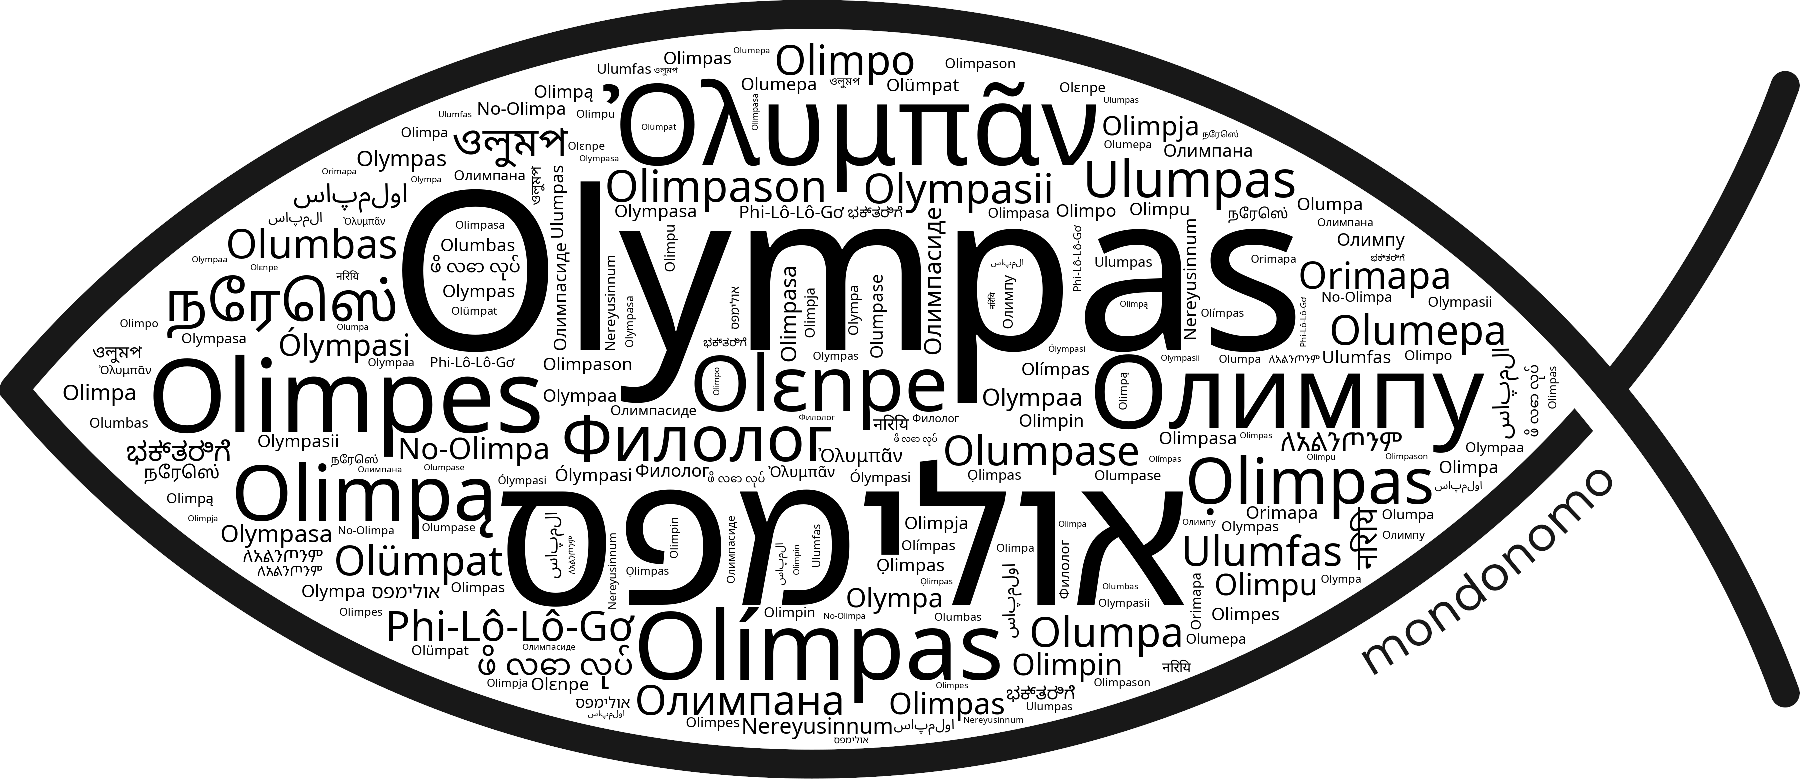 Name Olympas in the world's Bibles